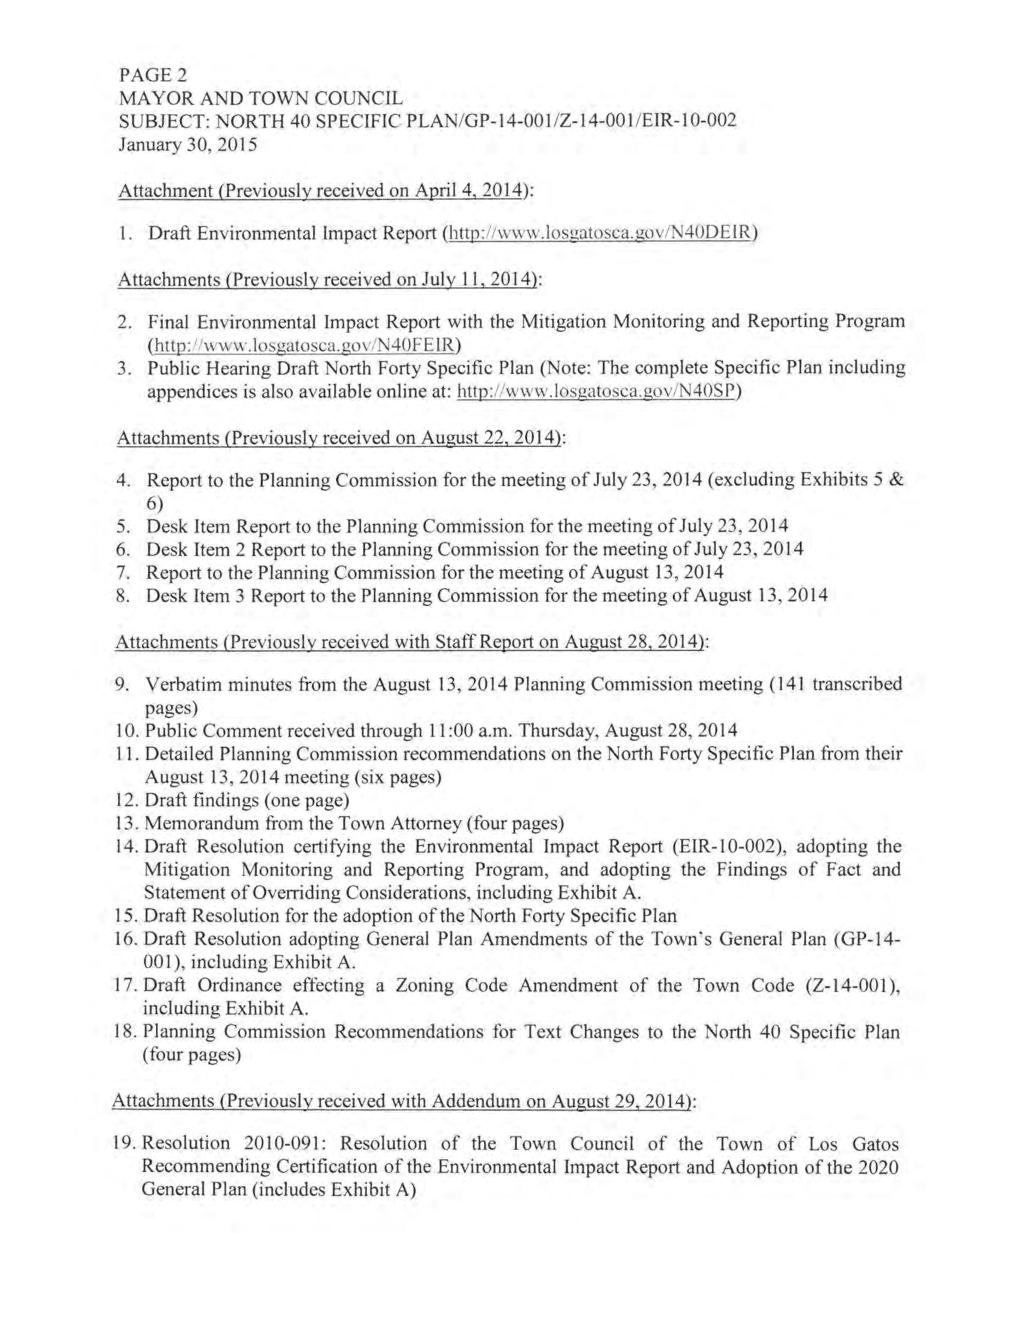 PAGE 2 MAYOR AND TOWN COUNCIL SUBJECT: NORTH 40 SPECIFIC PLAN /GP -14-001 /Z -14-001 /EIR -10-002 January 30, 2015 Attachment (Previously received on April 4, 2014): 1.